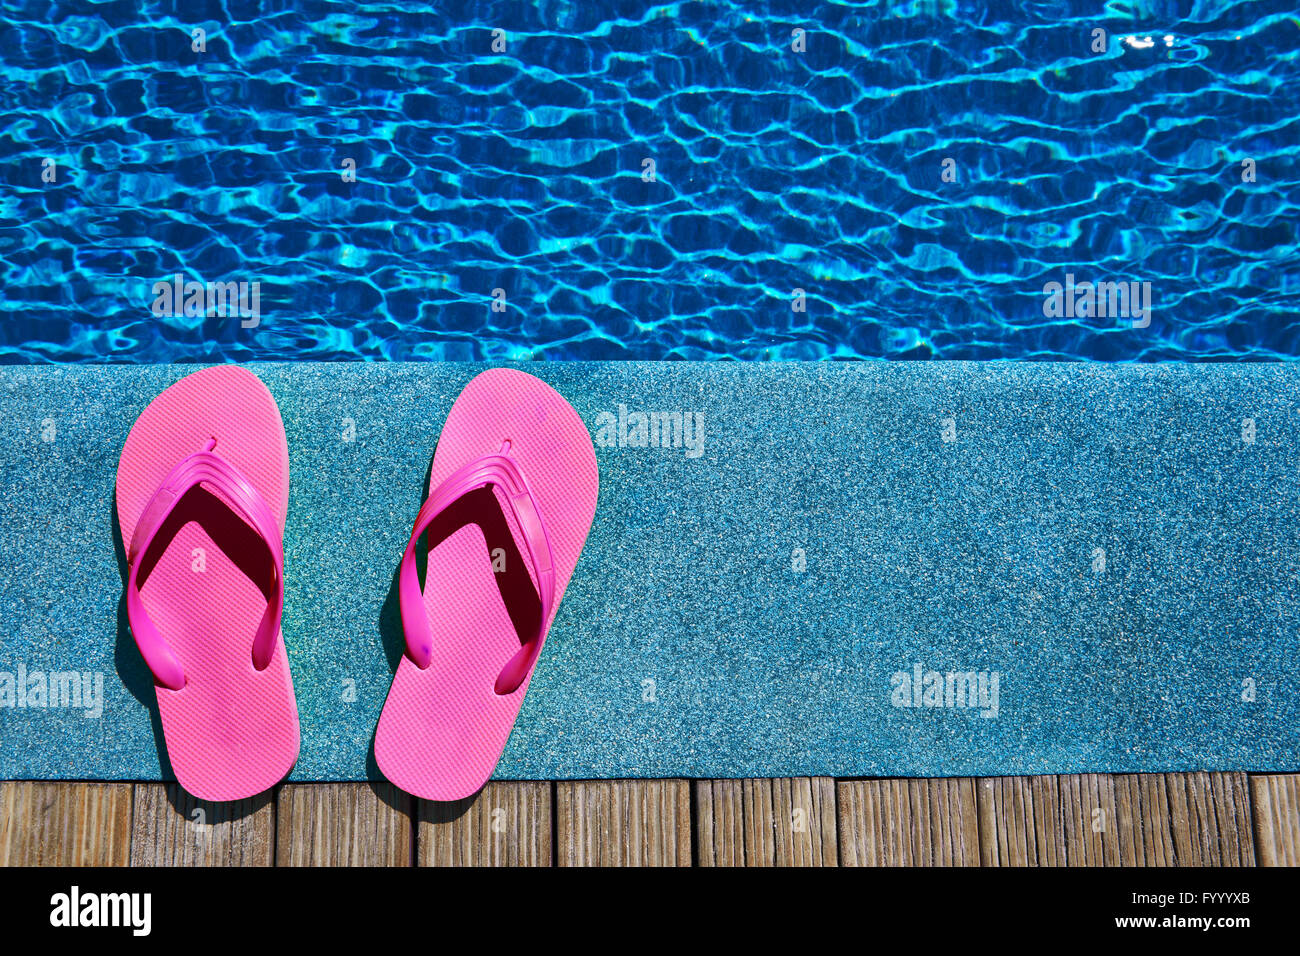 Slippers by a swimming pool Stock Photo - Alamy